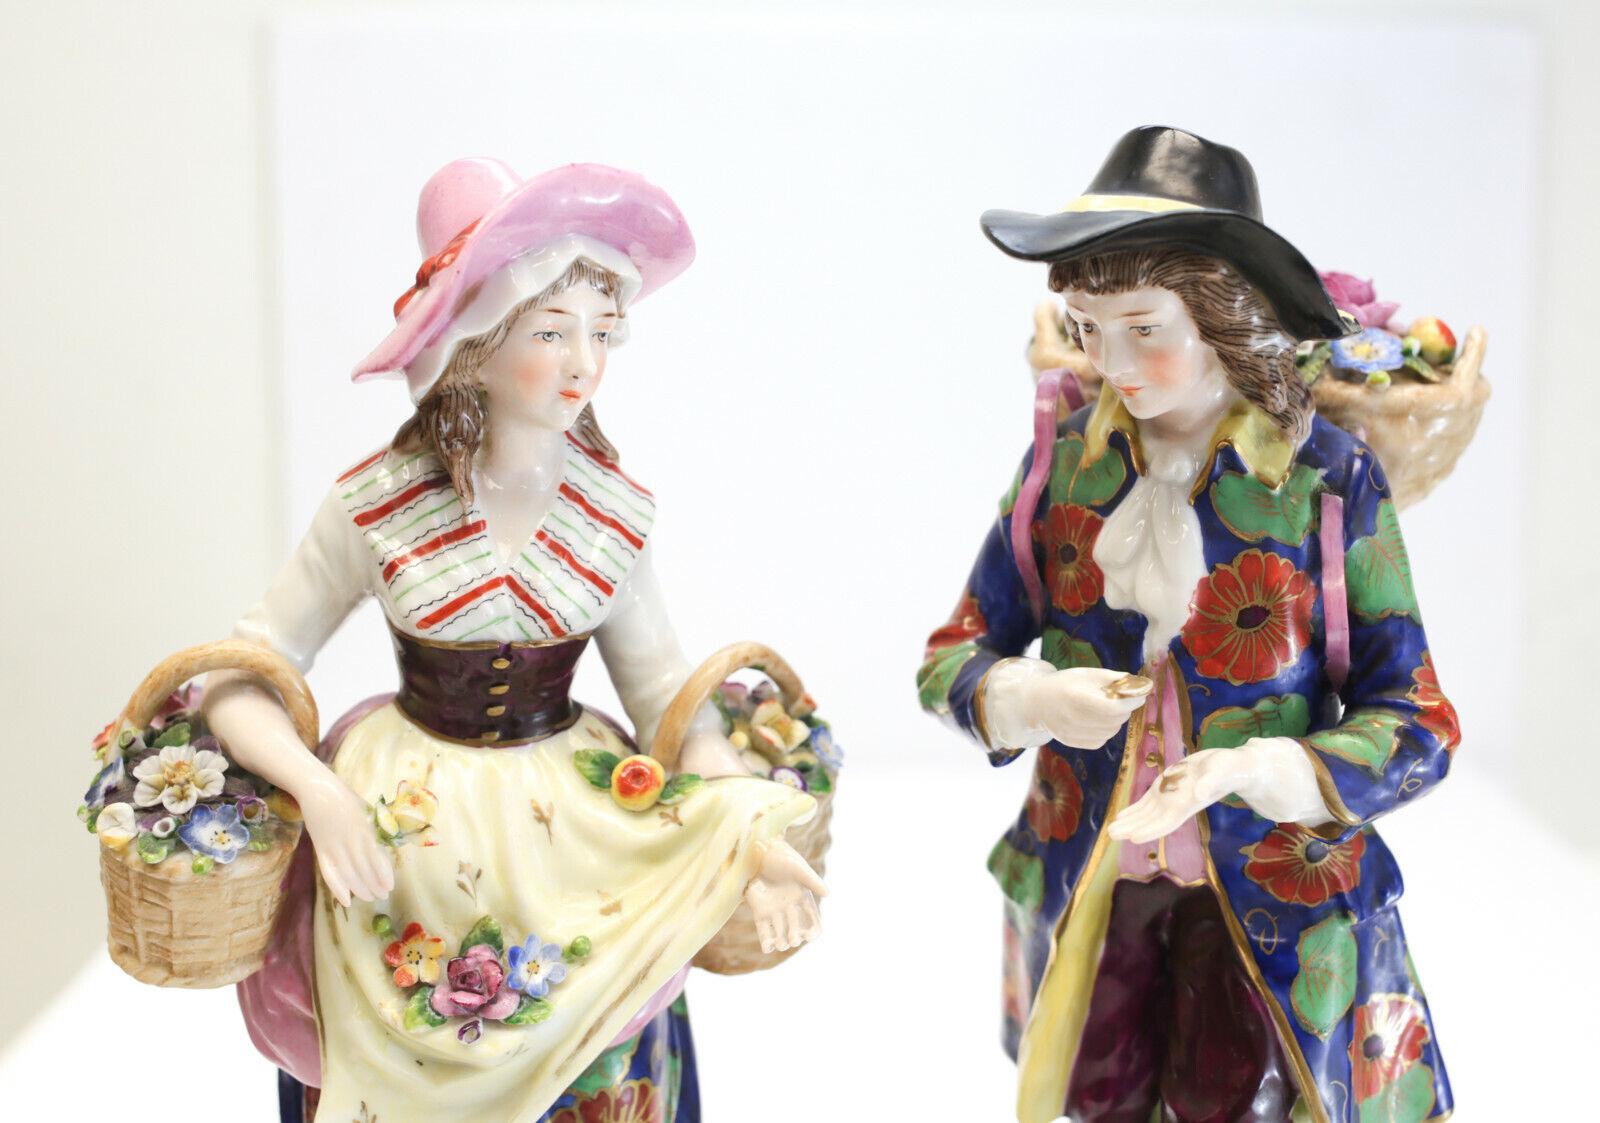 Charming pair of English Derby porcelain figurines, flower baskets, circa 1760

A beautiful hand painted couple picking flowers; both dressed in 18th century period era garbs with brightly floral patterns and gilt trim.

Additional